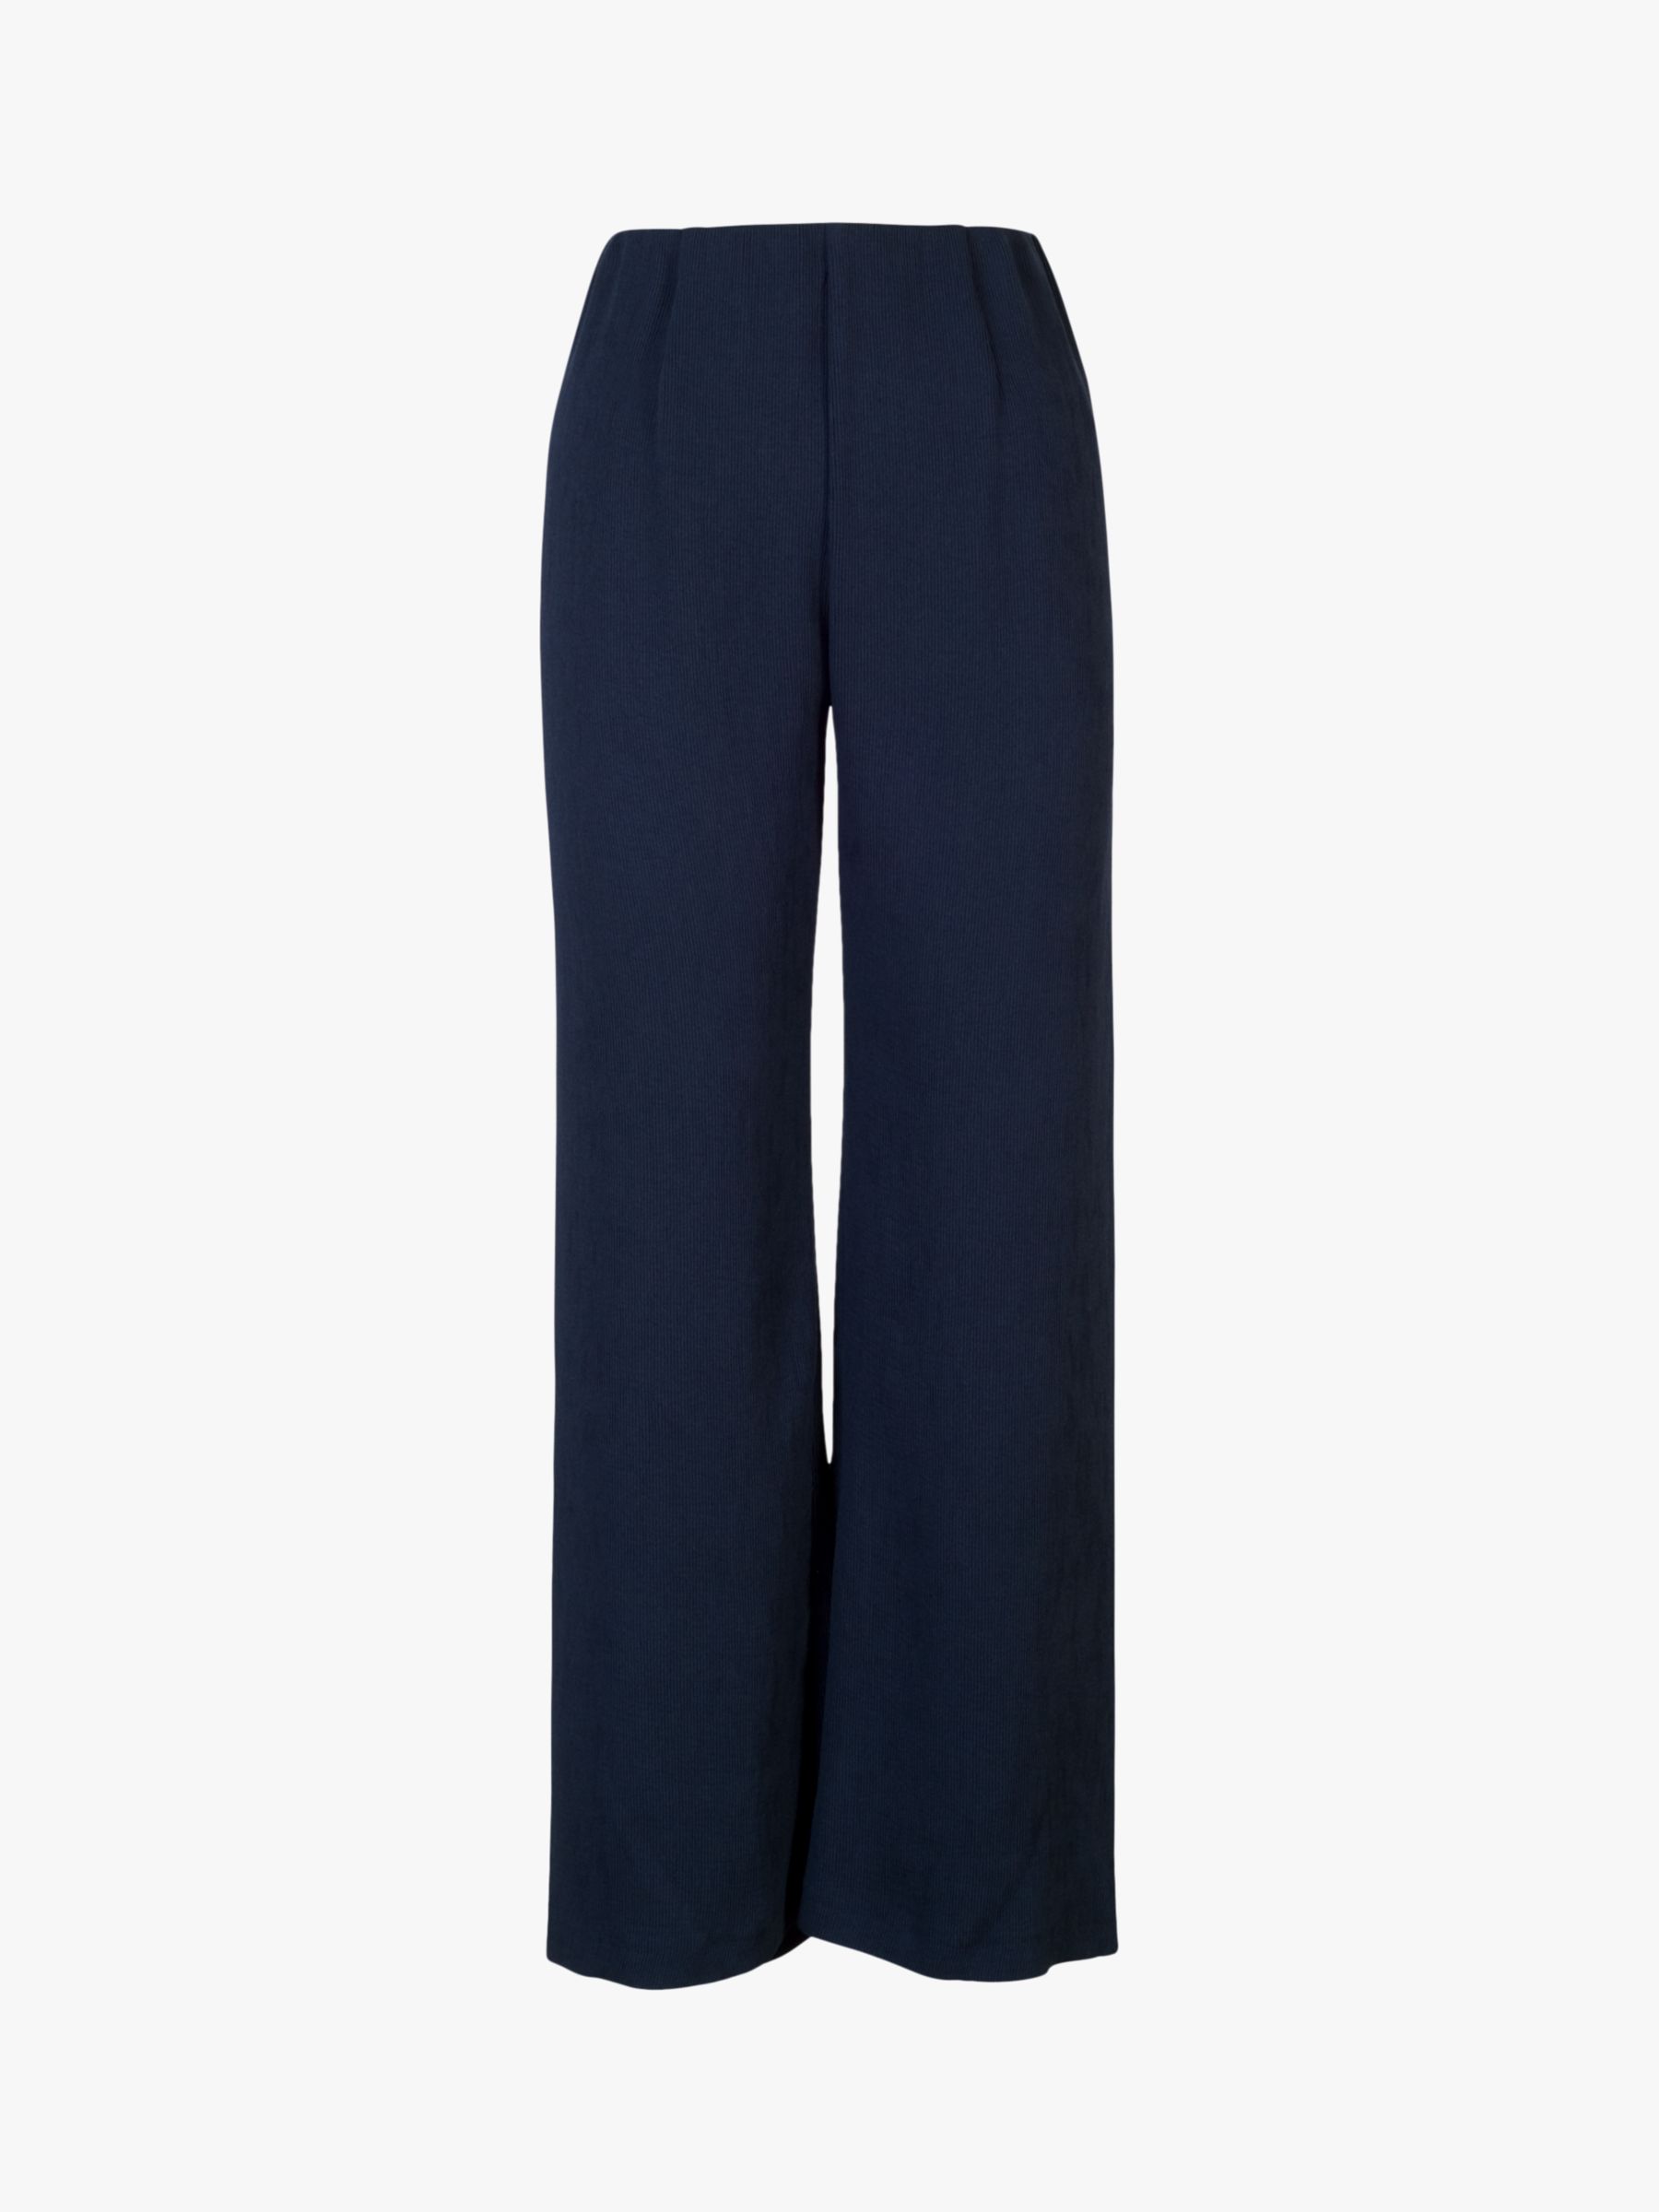 chesca Crinkle Trousers, Navy at John Lewis & Partners